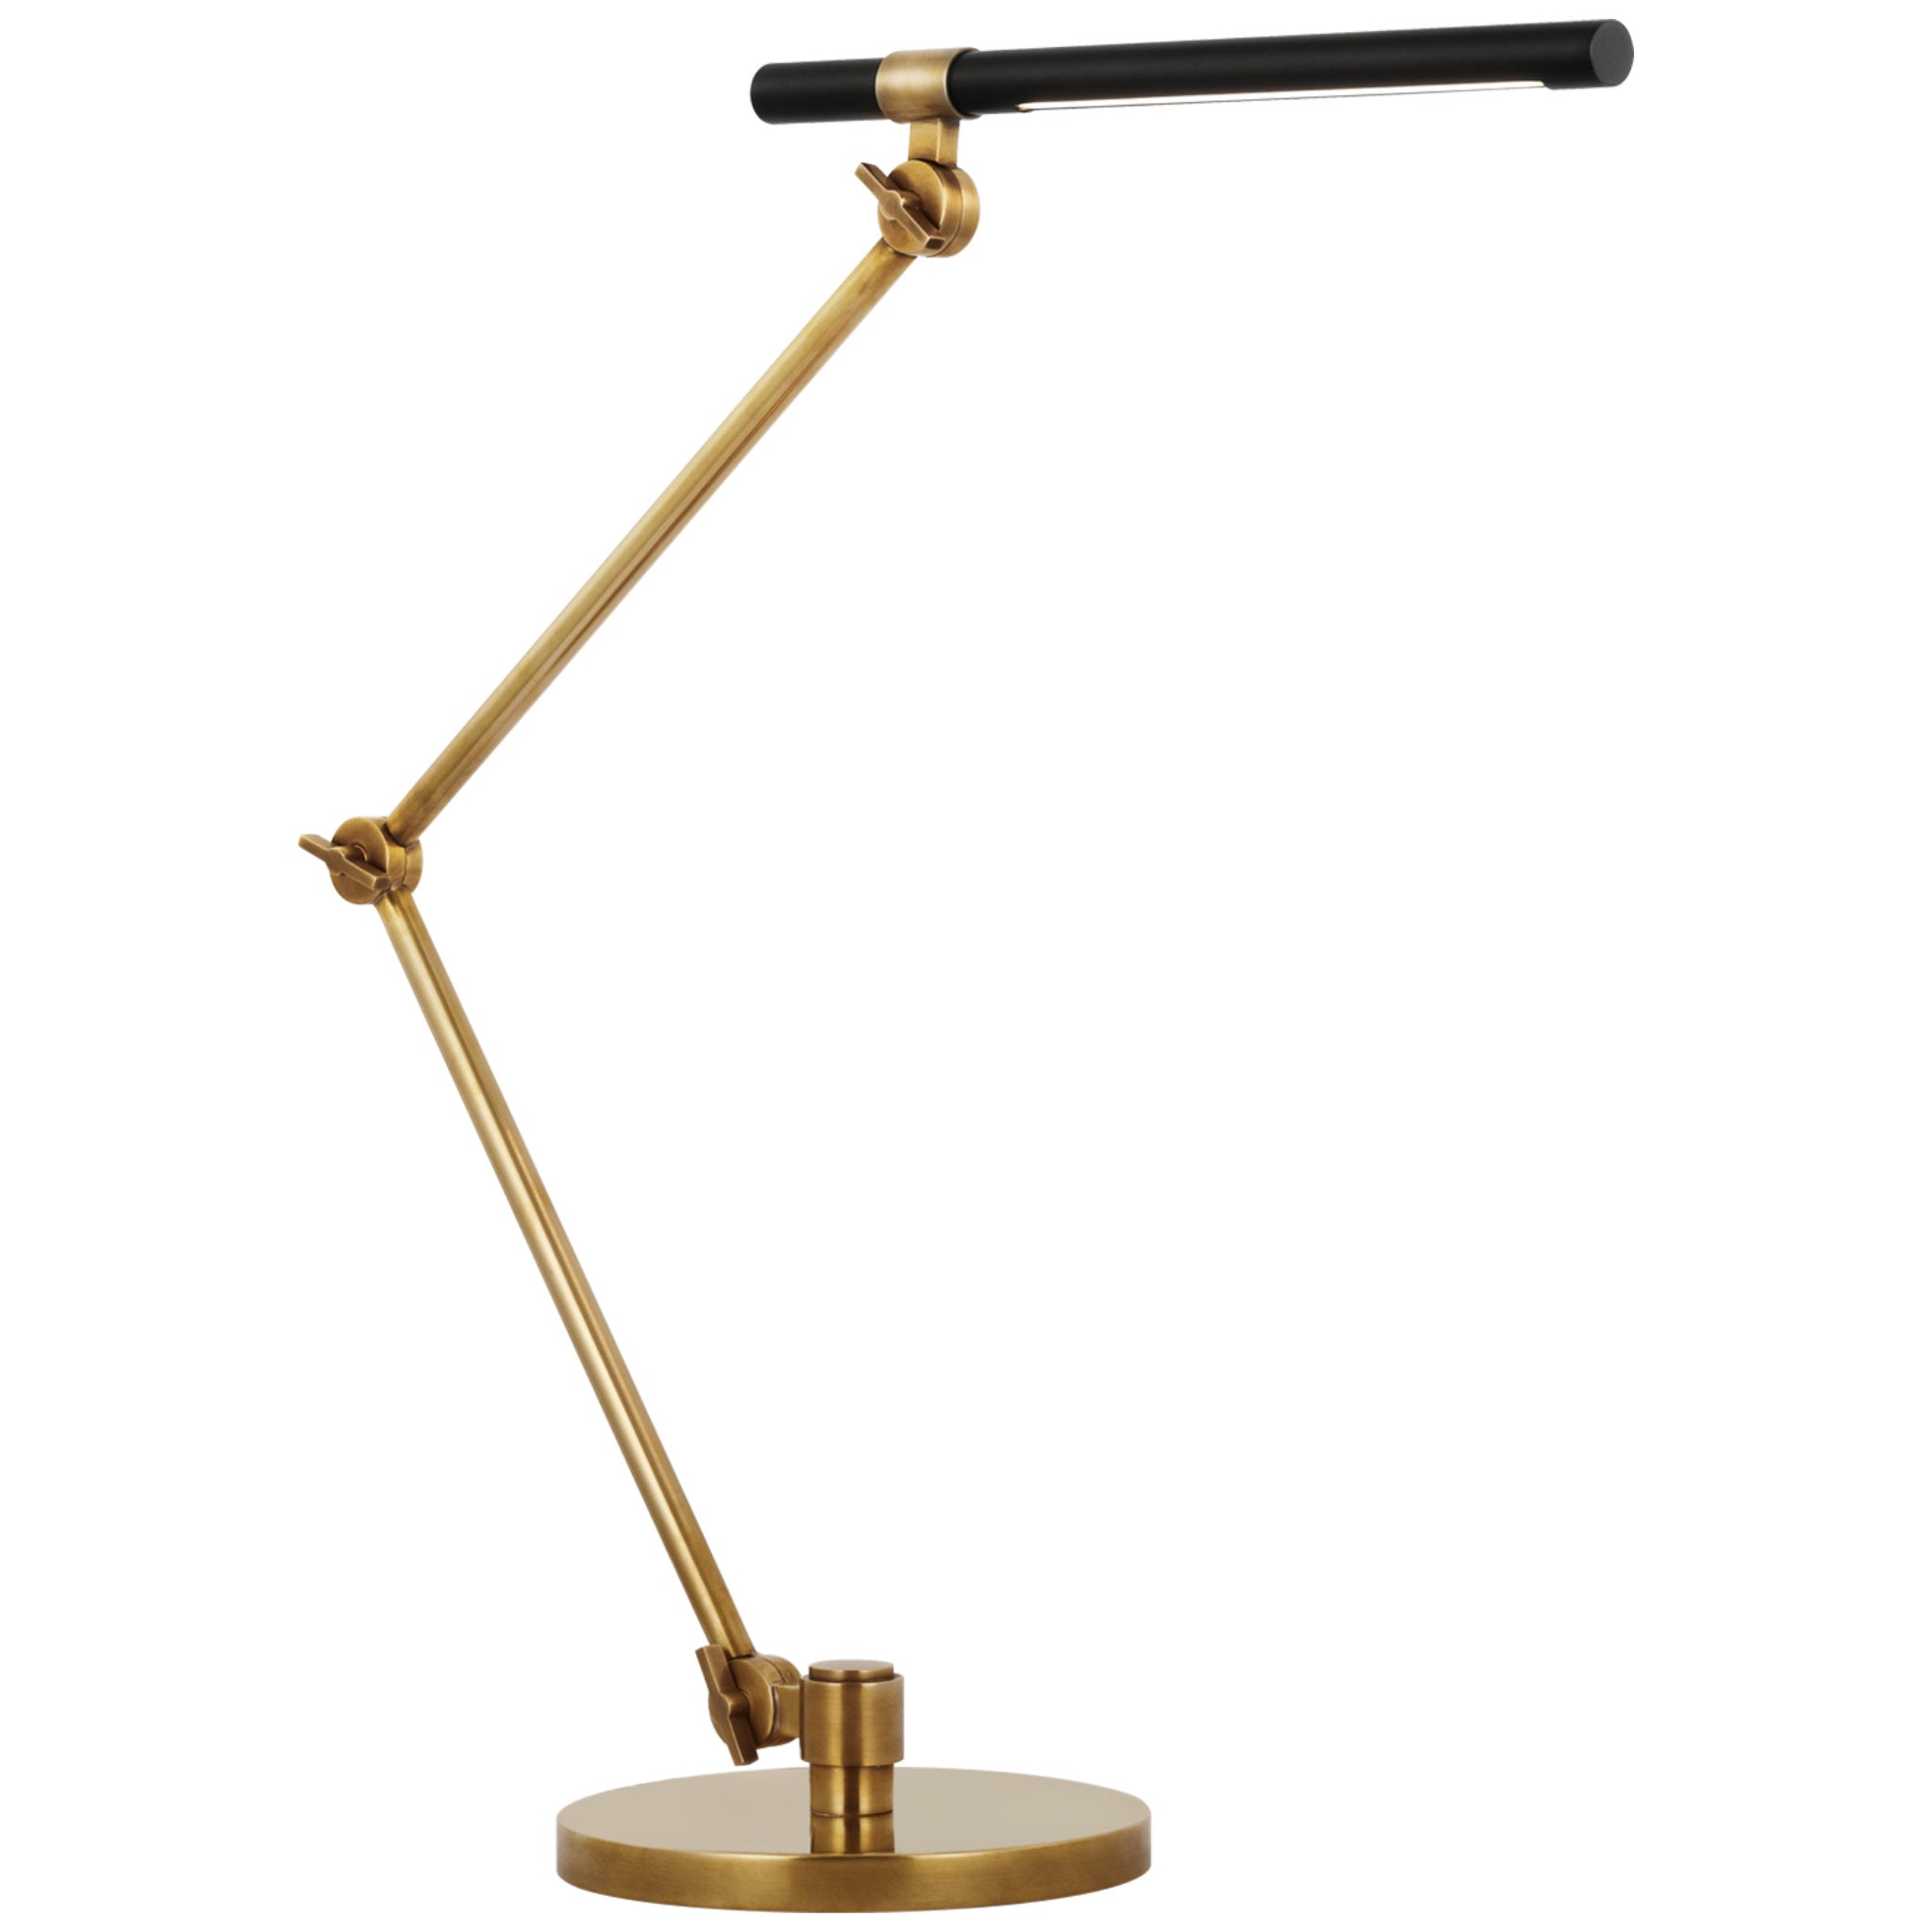 Ian K. Fowler Heron Large Desk Lamp in Hand-Rubbed Antique Brass and Matte Black